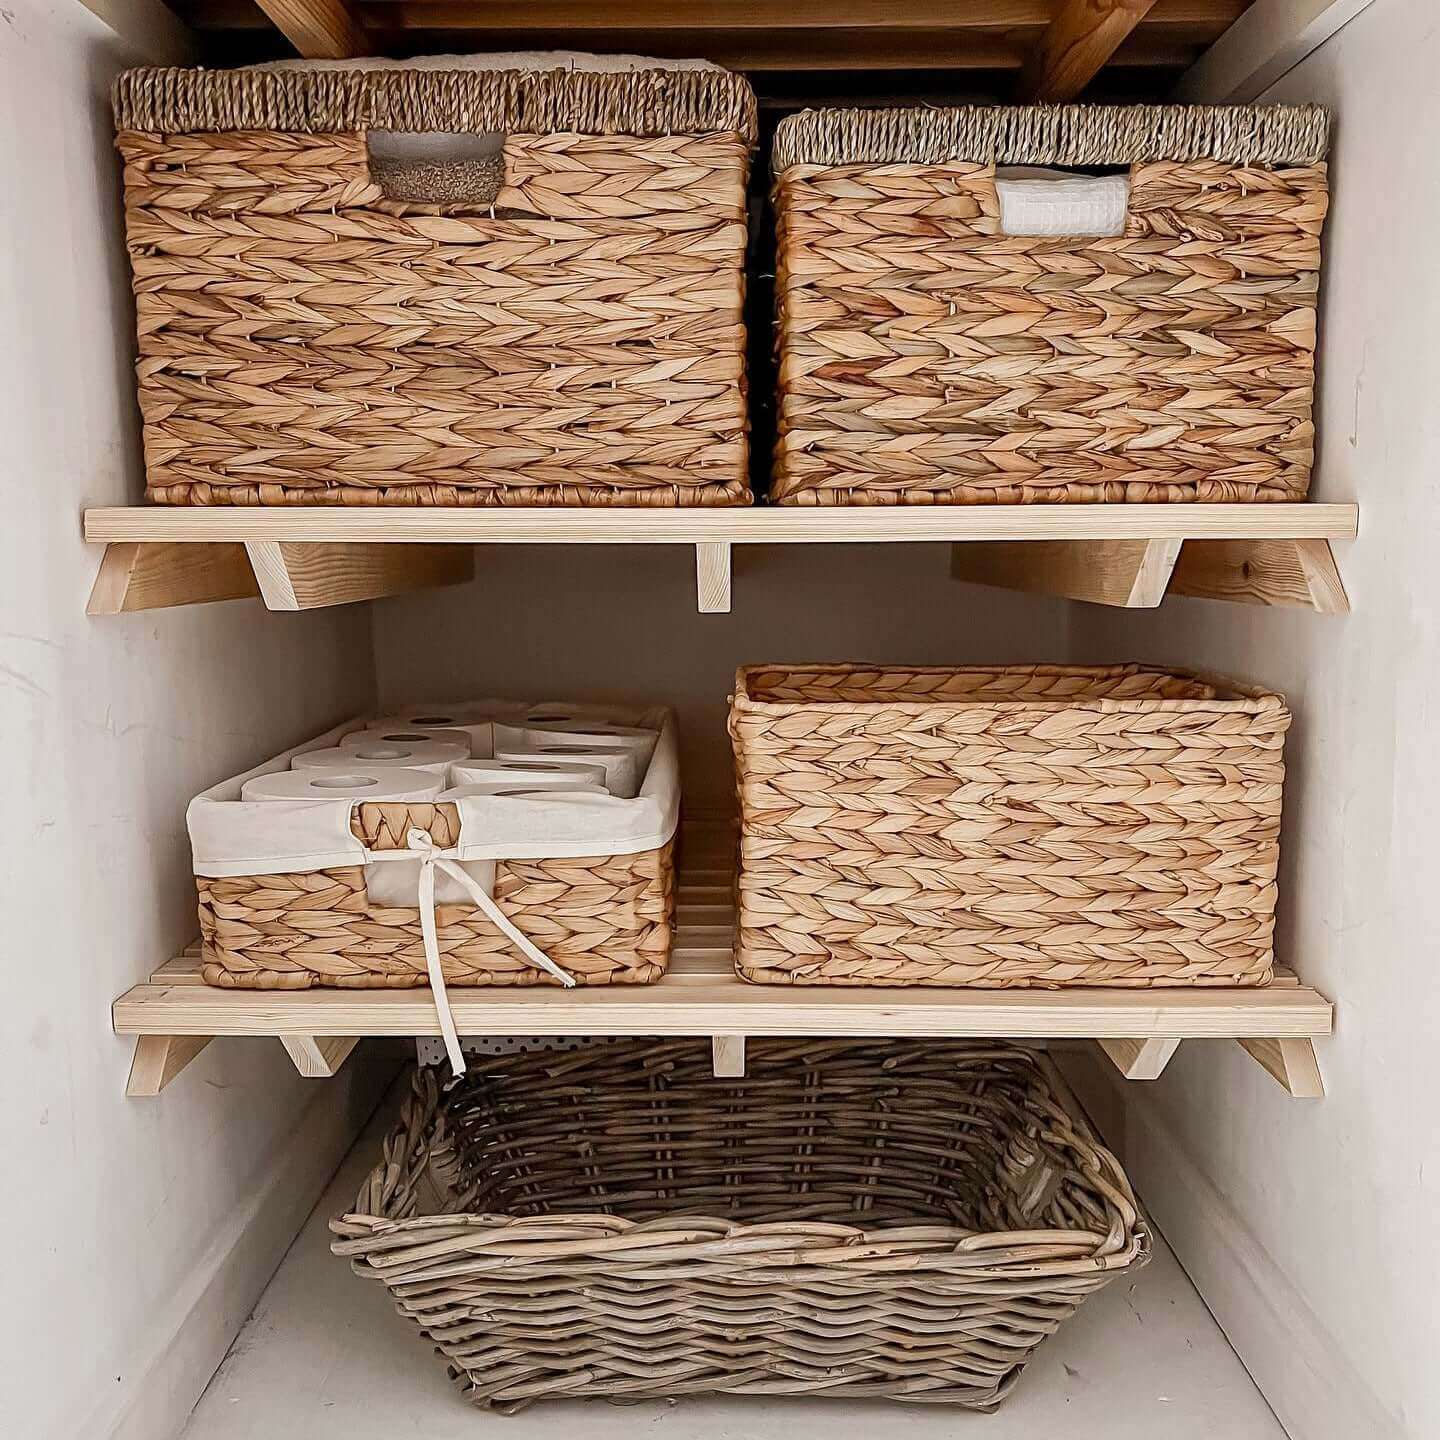 Airing Cupboard Wooden Slatted Shelves - 35 cm by 25 cm